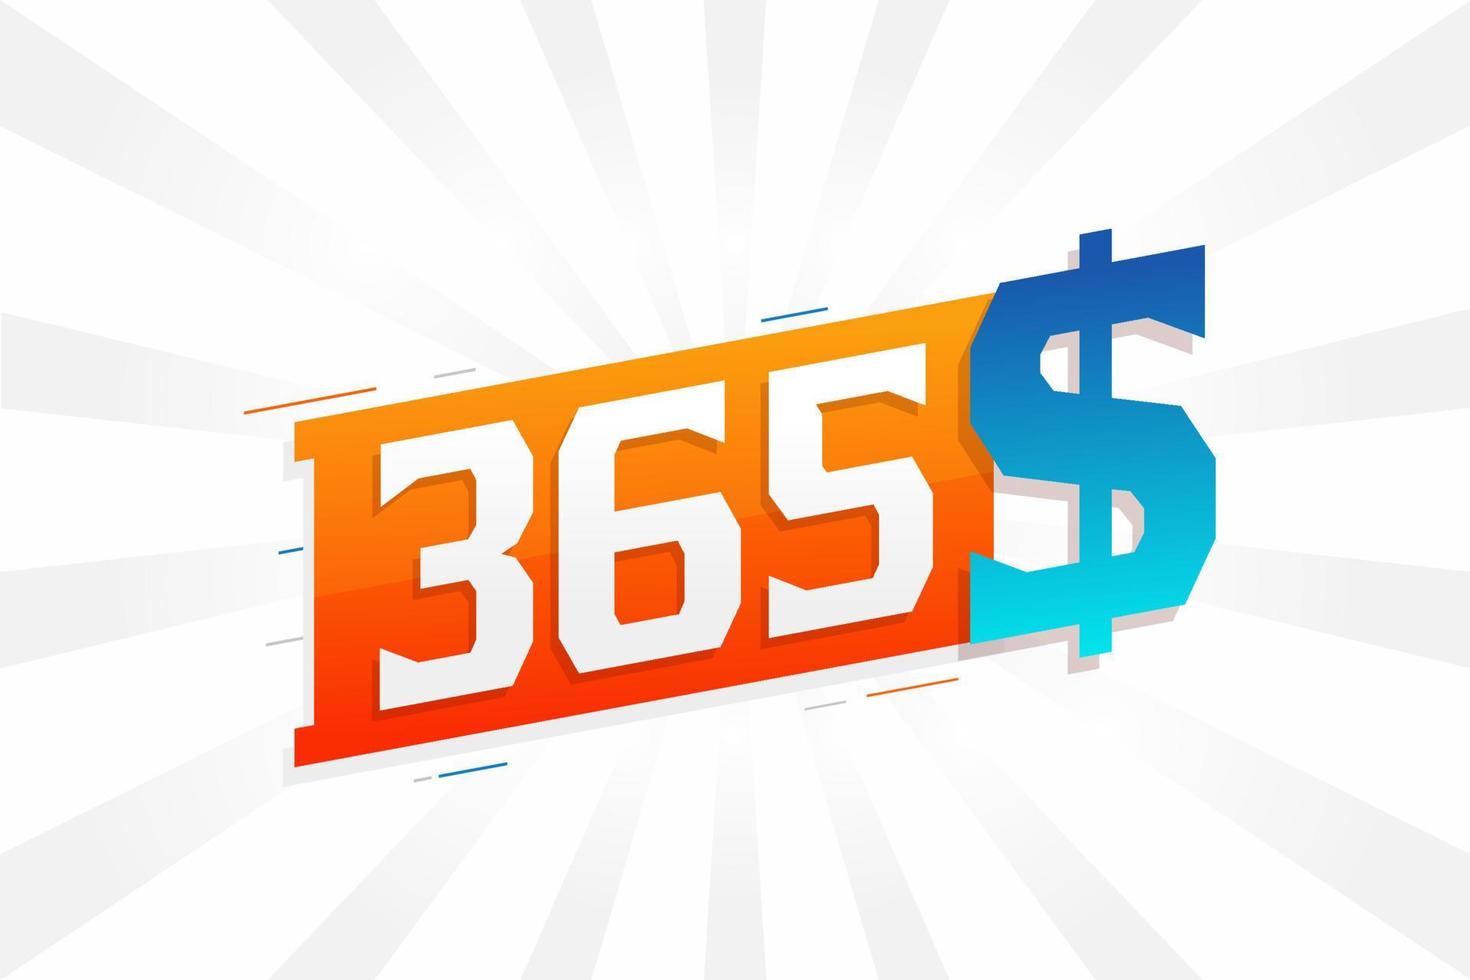 365 Dollar currency vector text symbol. 365 USD United States Dollar American Money stock vector